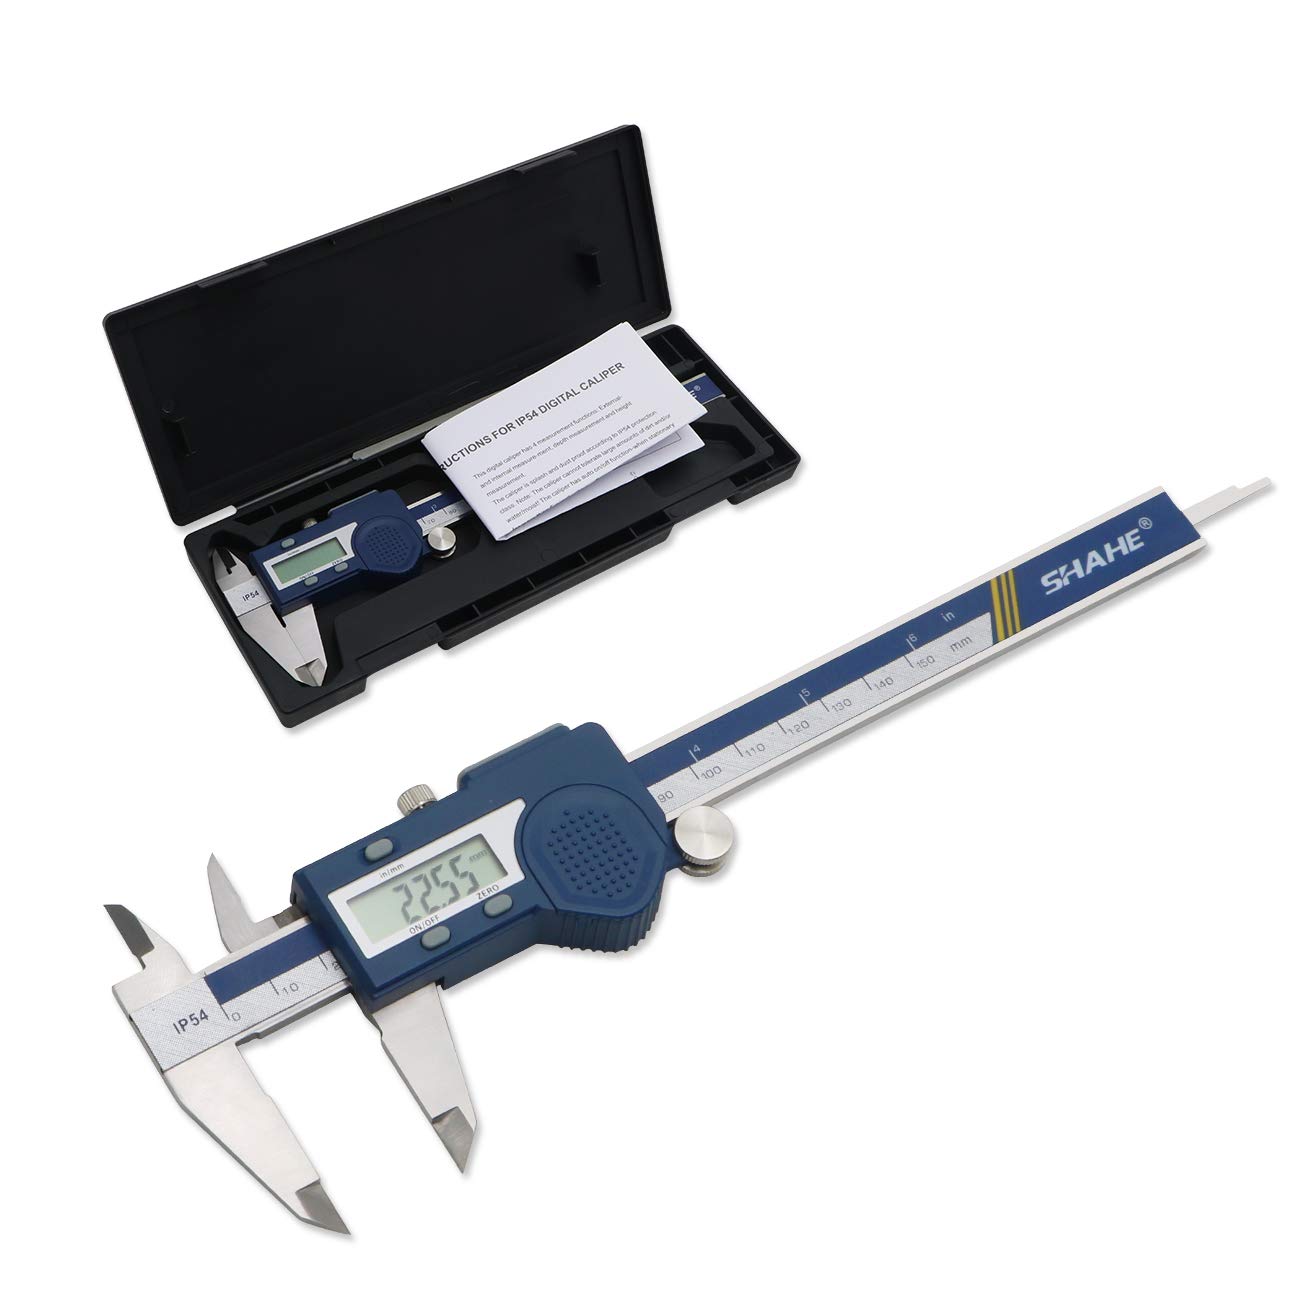 Shahe Electronic Digital Caliper, Micrometer Caliper Measuring Tool , 6 Inch150Mm Vernier Caliper With Stainless Steel, Large Lc